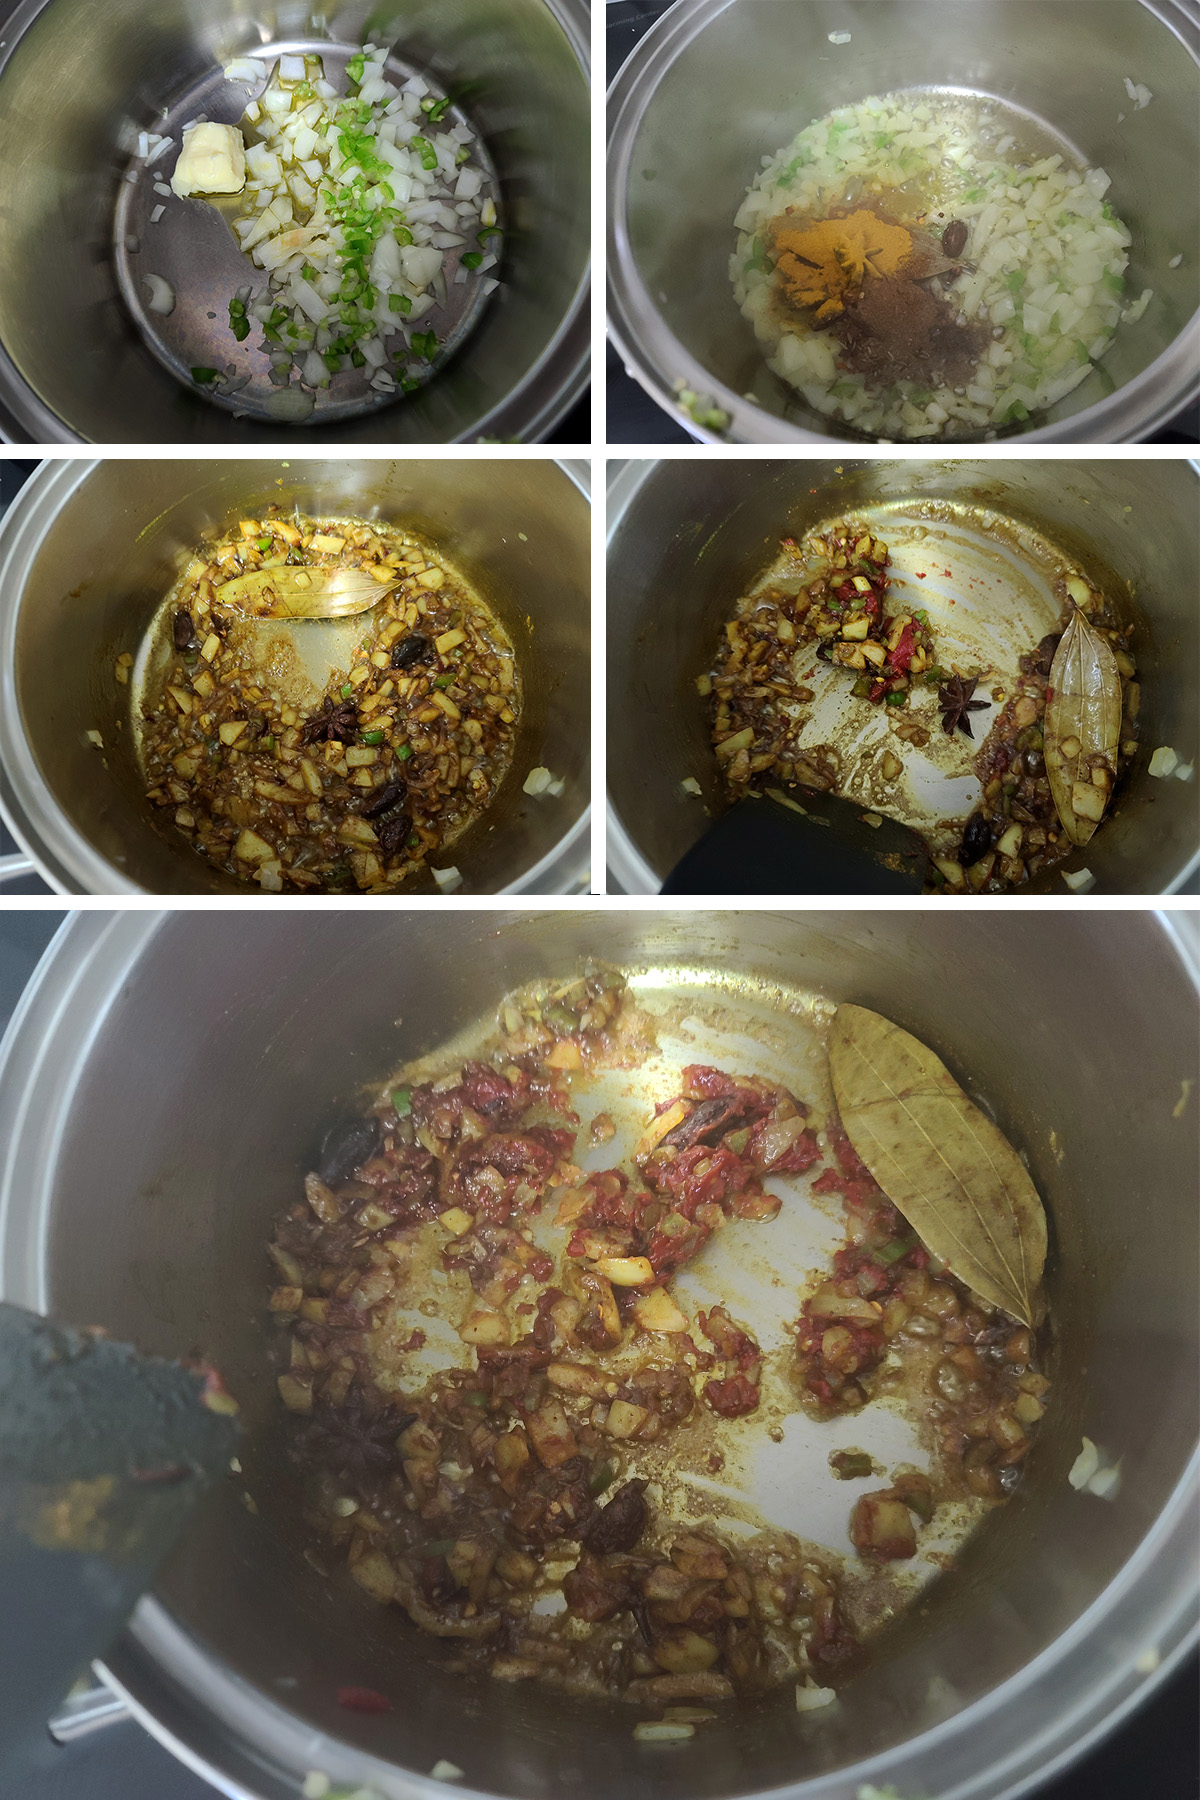 A 5 part image showing the onions, garlic, peppers, and spices being cooked together, as described.